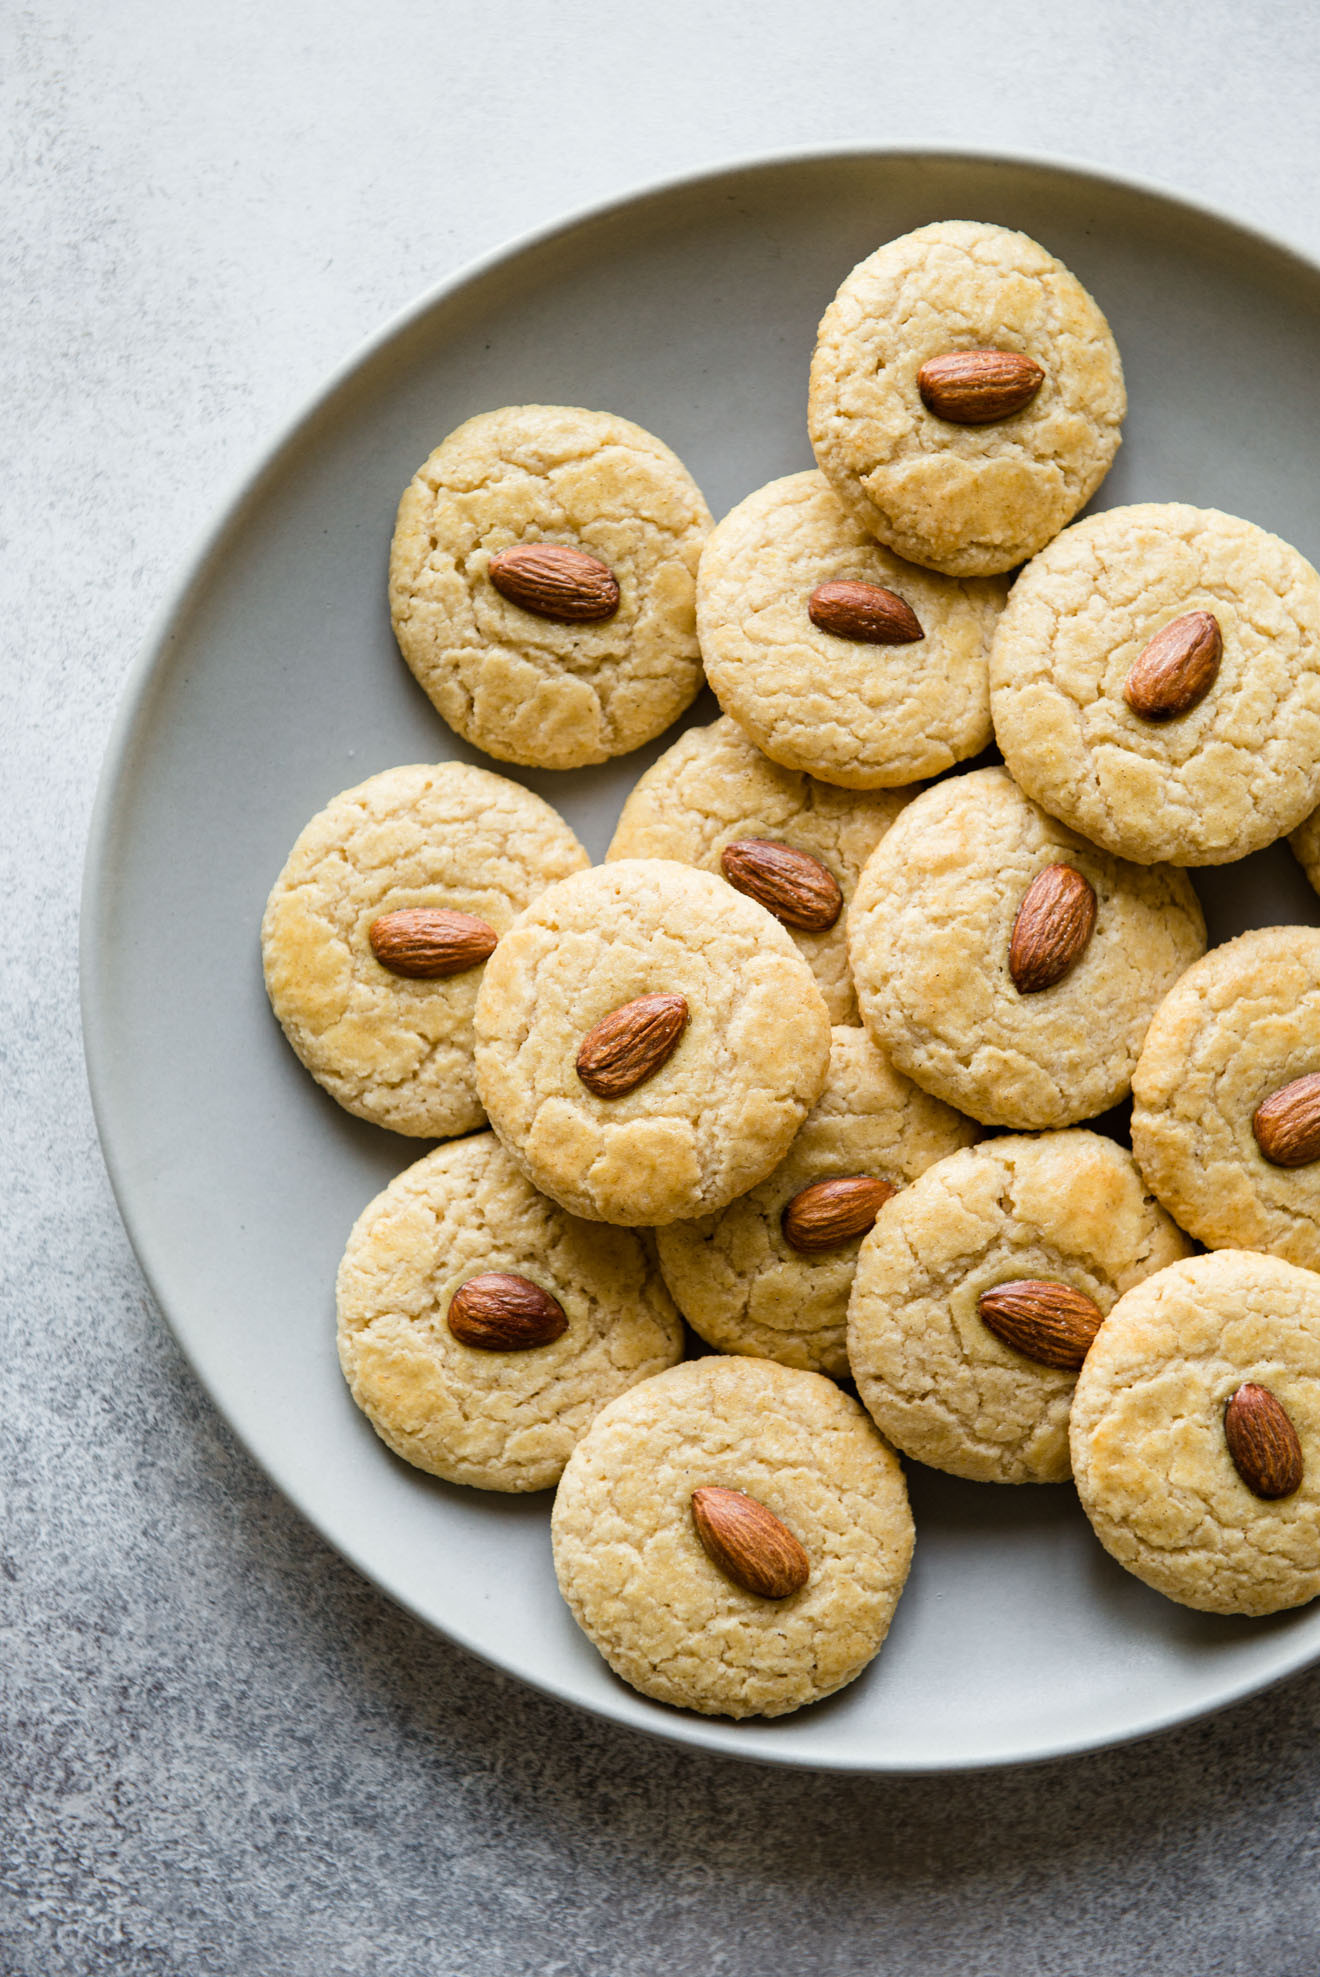 Chinese Almond Cookie Recipes
 Gluten Free Chinese Almond Cookies